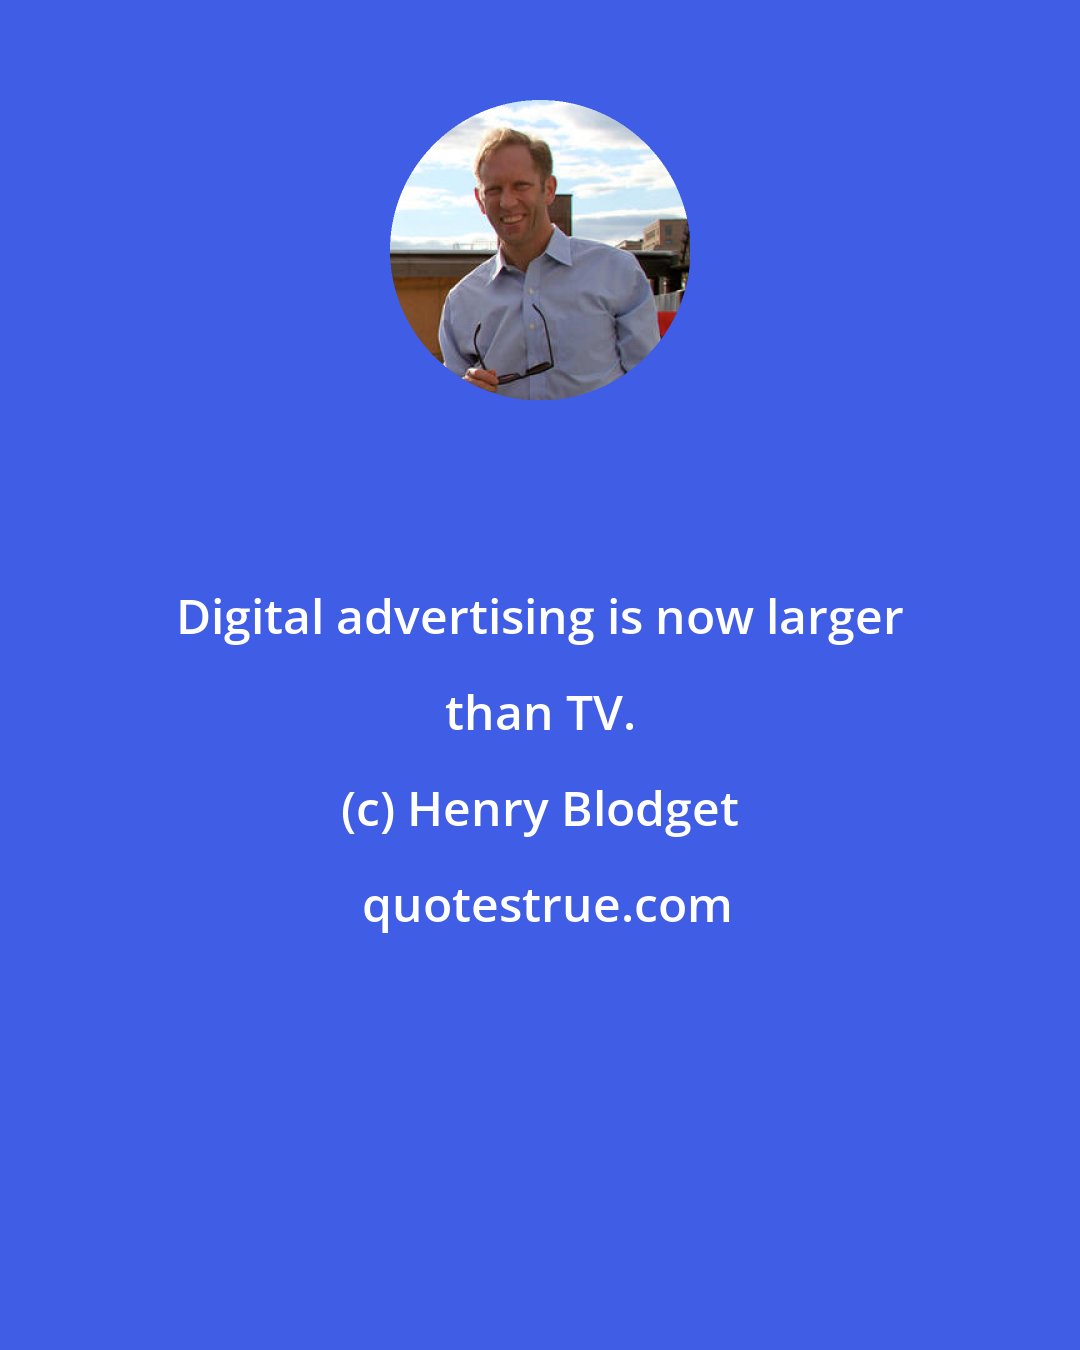 Henry Blodget: Digital advertising is now larger than TV.